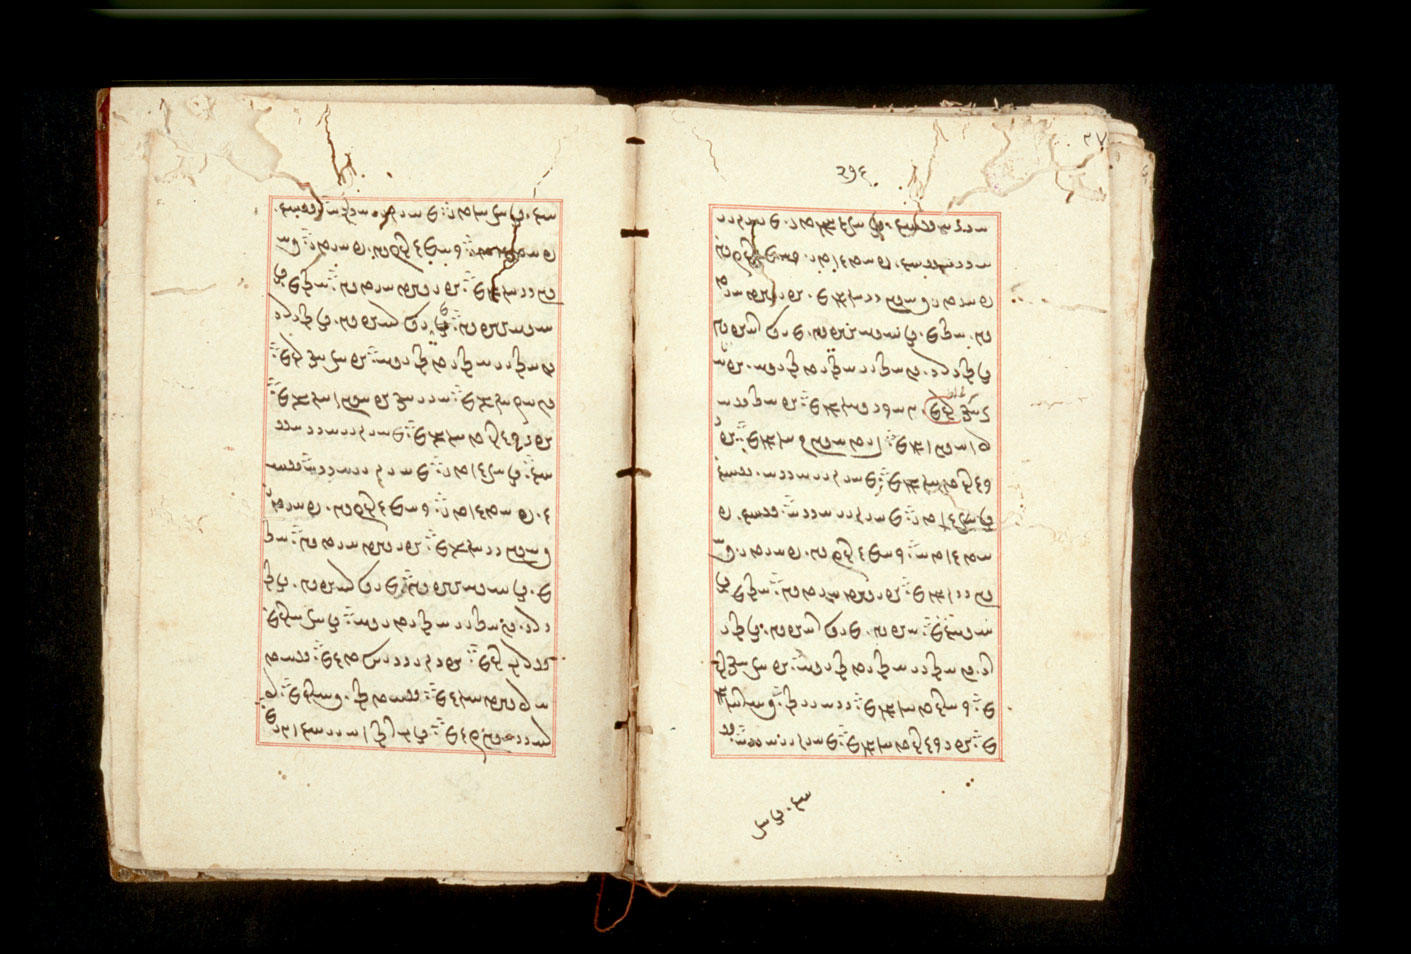 Folios 276v (right) and 277r (left)